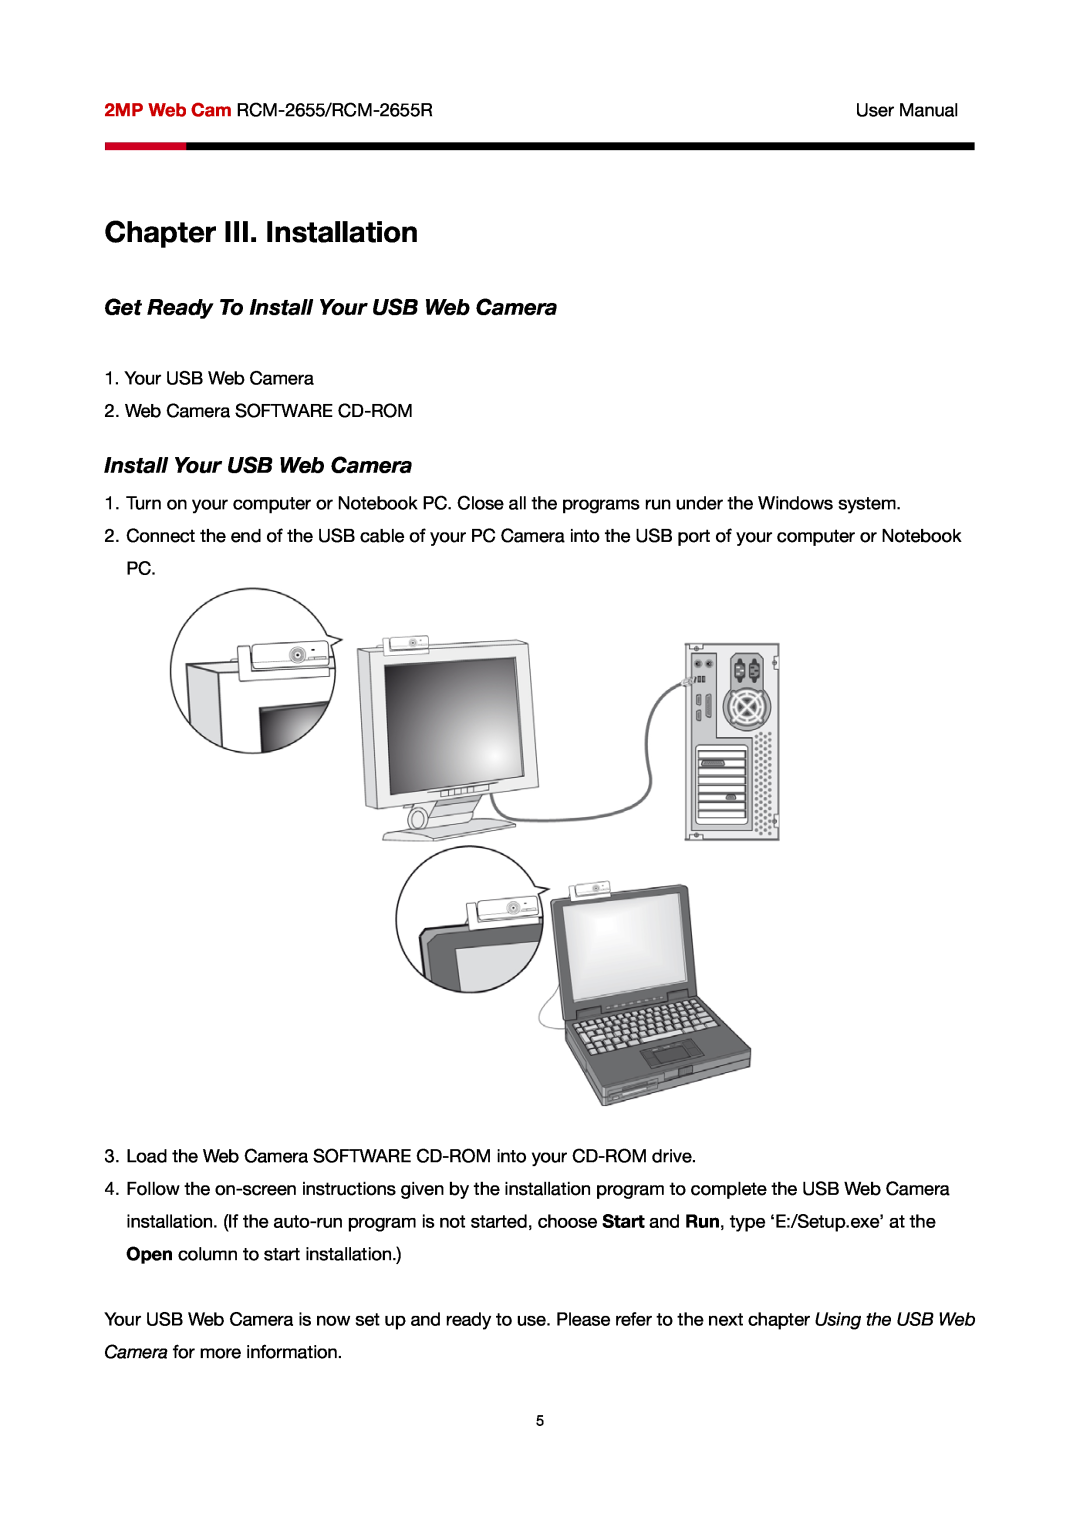 Rosewill RCM-2655R user manual Chapter III. Installation, Get Ready To Install Your USB Web Camera 